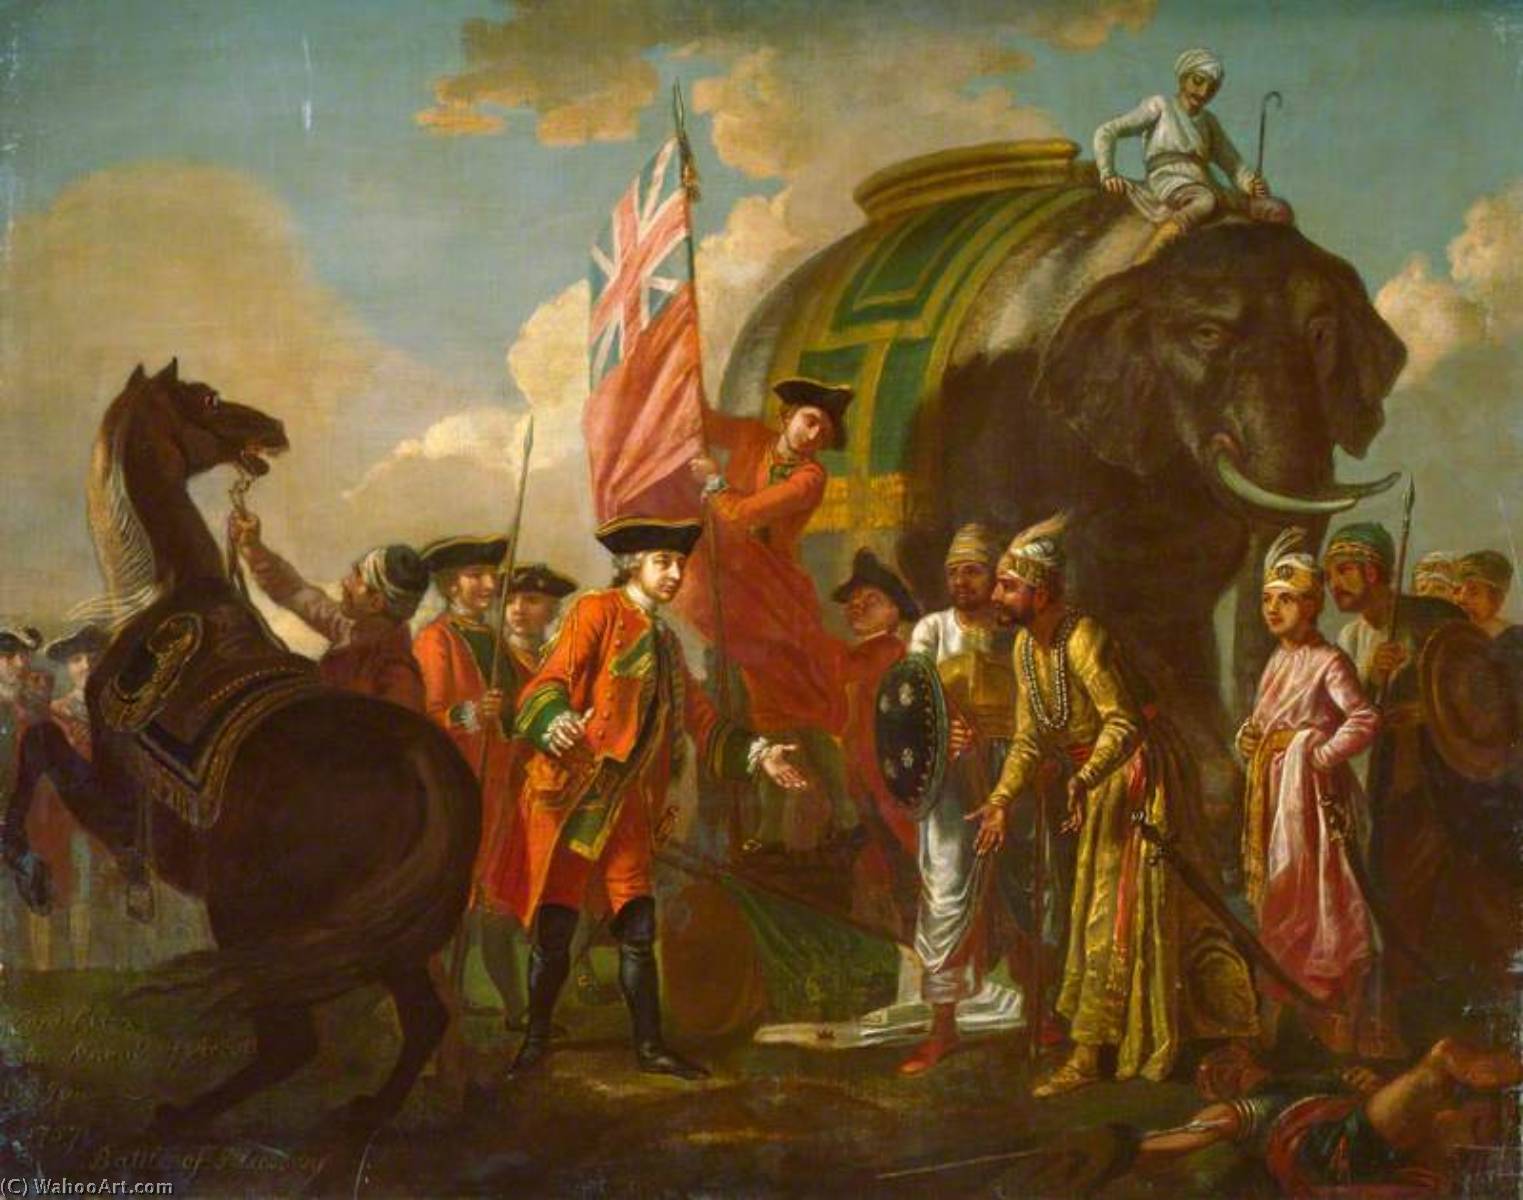 WikiOO.org - 백과 사전 - 회화, 삽화 Francis Hayman - Robert Clive and Mir Jafar after the Battle of Plassey, 1757